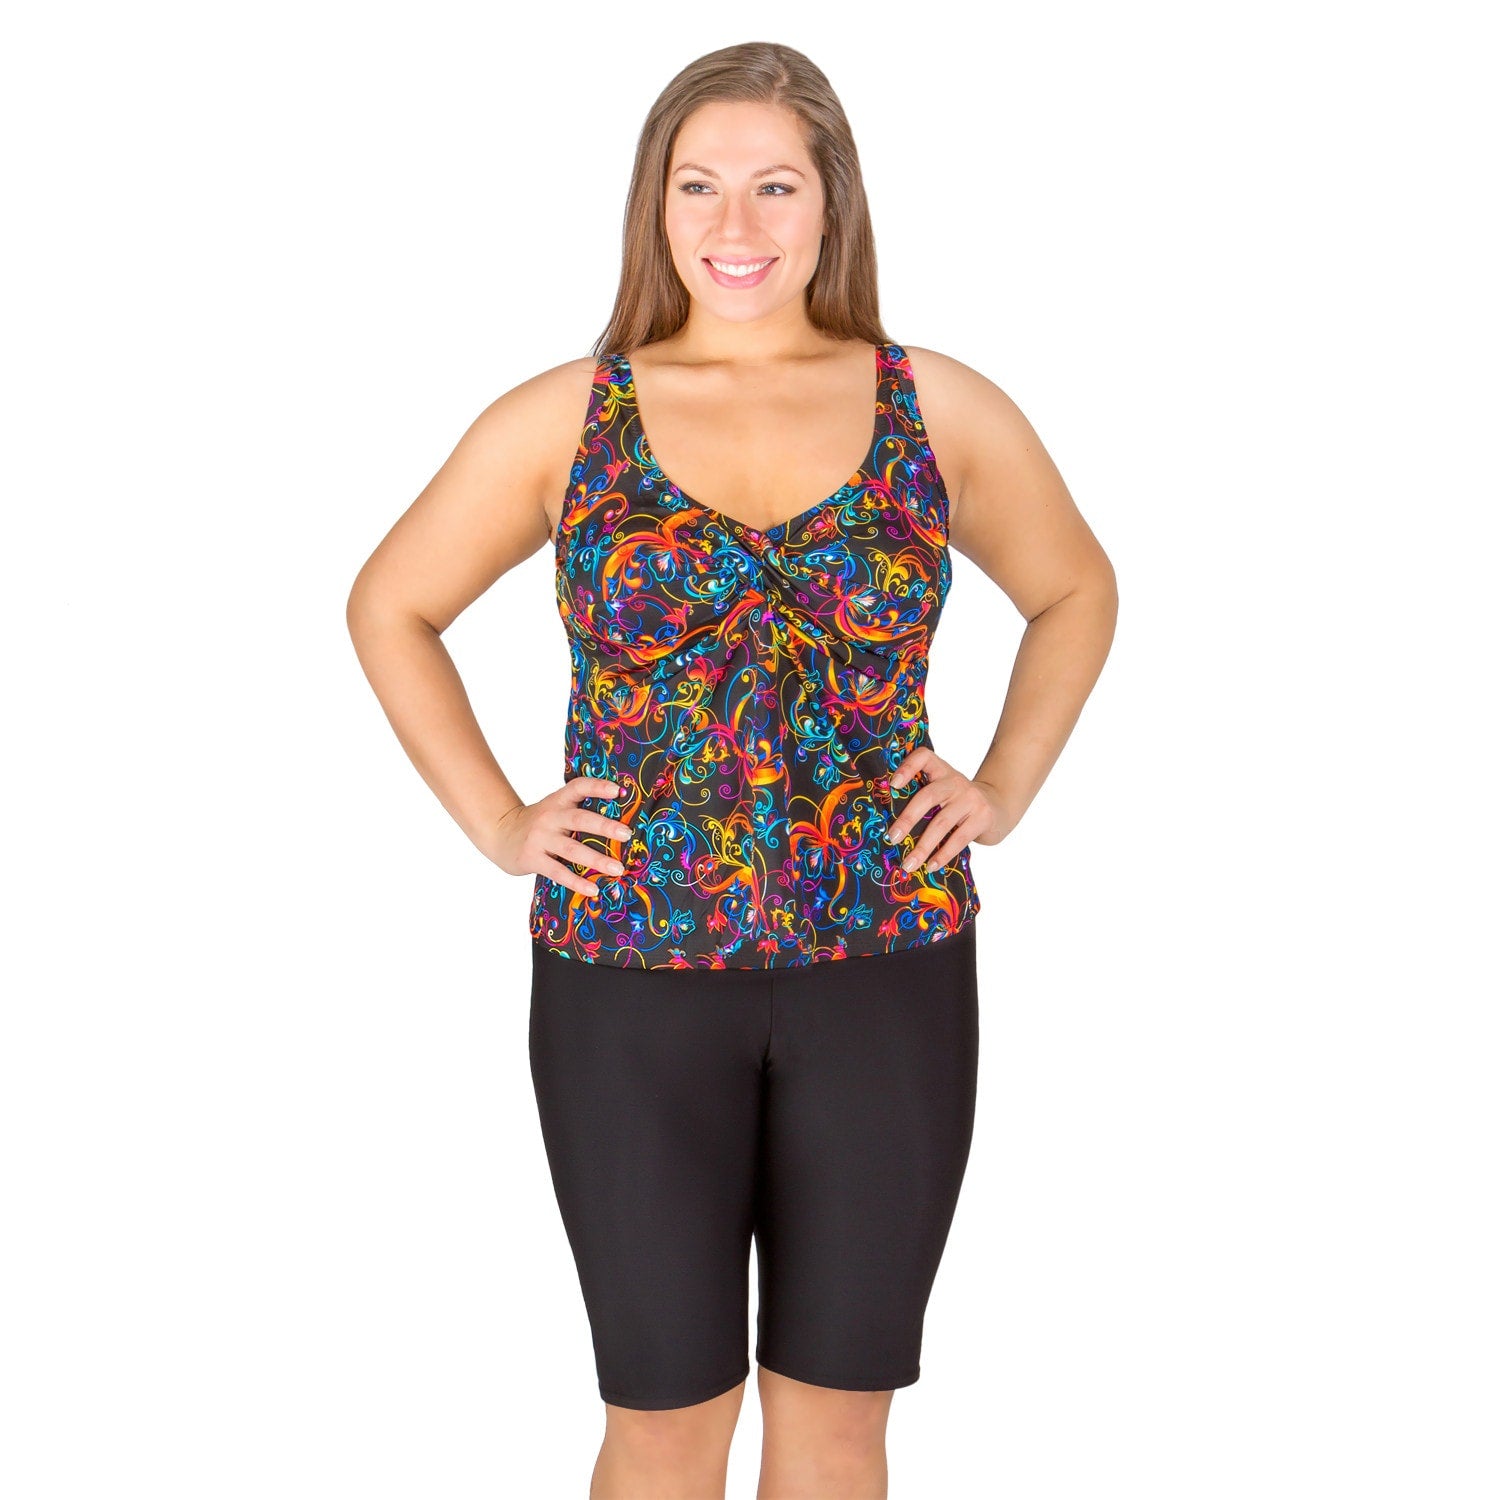 Plus Size Long Swim Bike Shorts for Great Coverage in Sizes 1X-6X